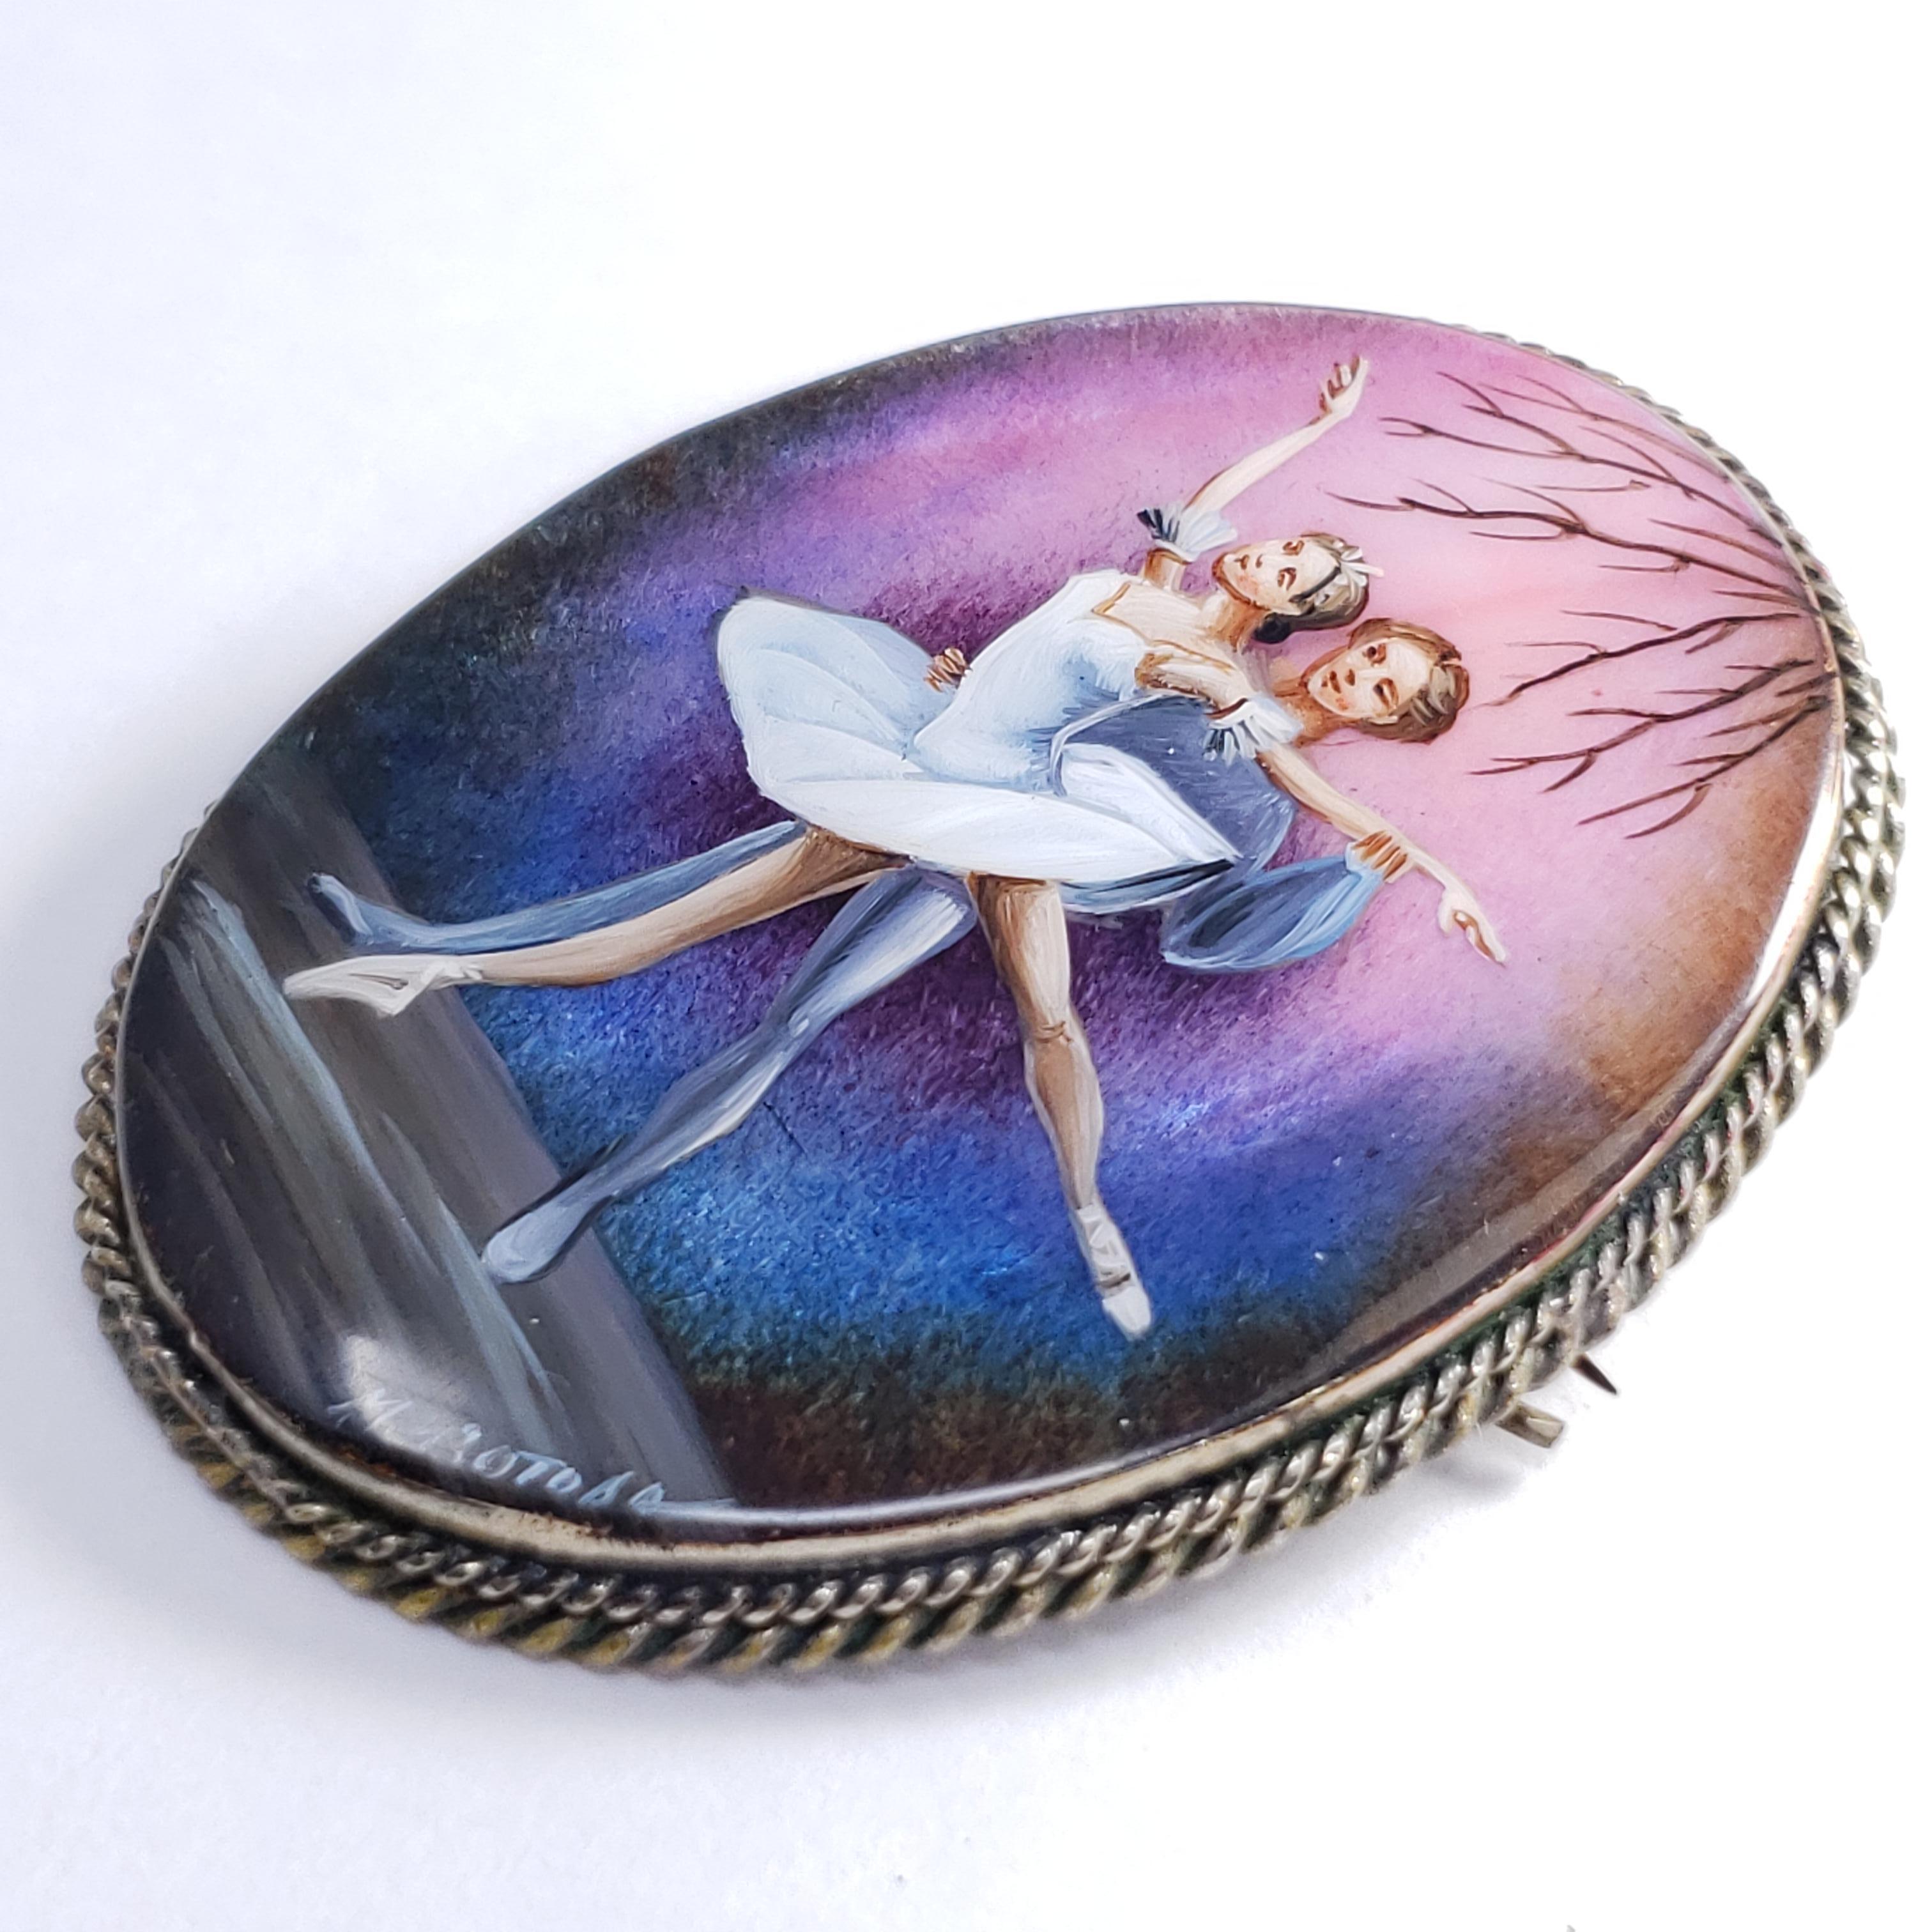 An exquisite Russian Fedoskino brooch set in a beautiful German silver bezel. Features a pair of ballet dancers on a blue & violet background, hand-painted on a mother-of-pearl stone with a layer of lacquer.

Signed by artist - M Izotova (М